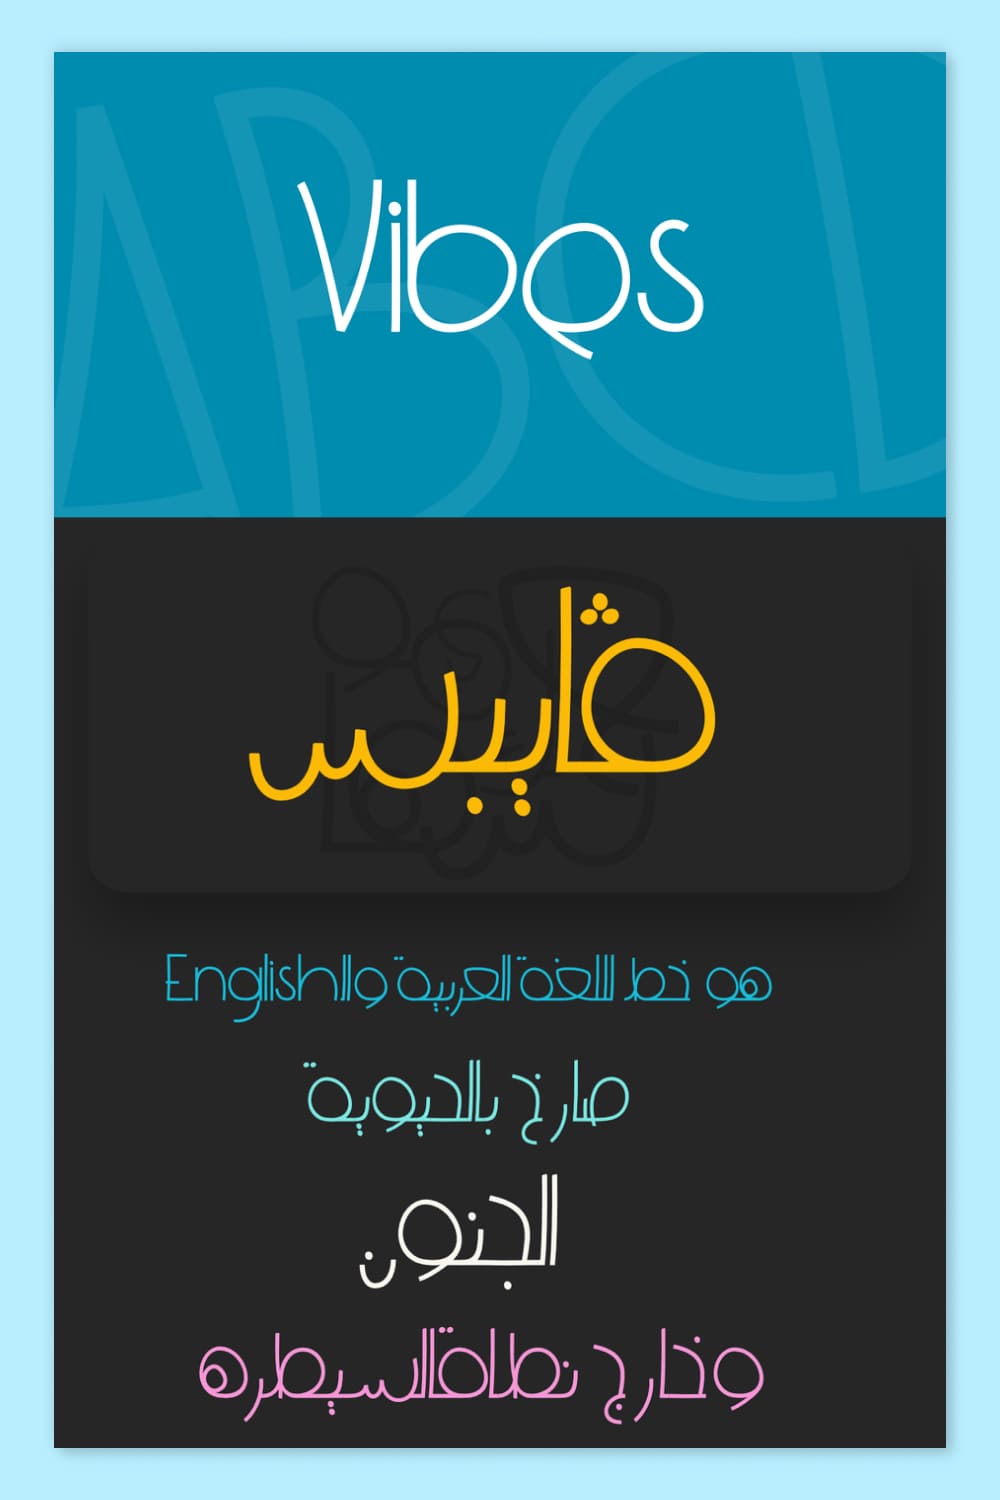 Farsi font example in white, yellow, green and pink.